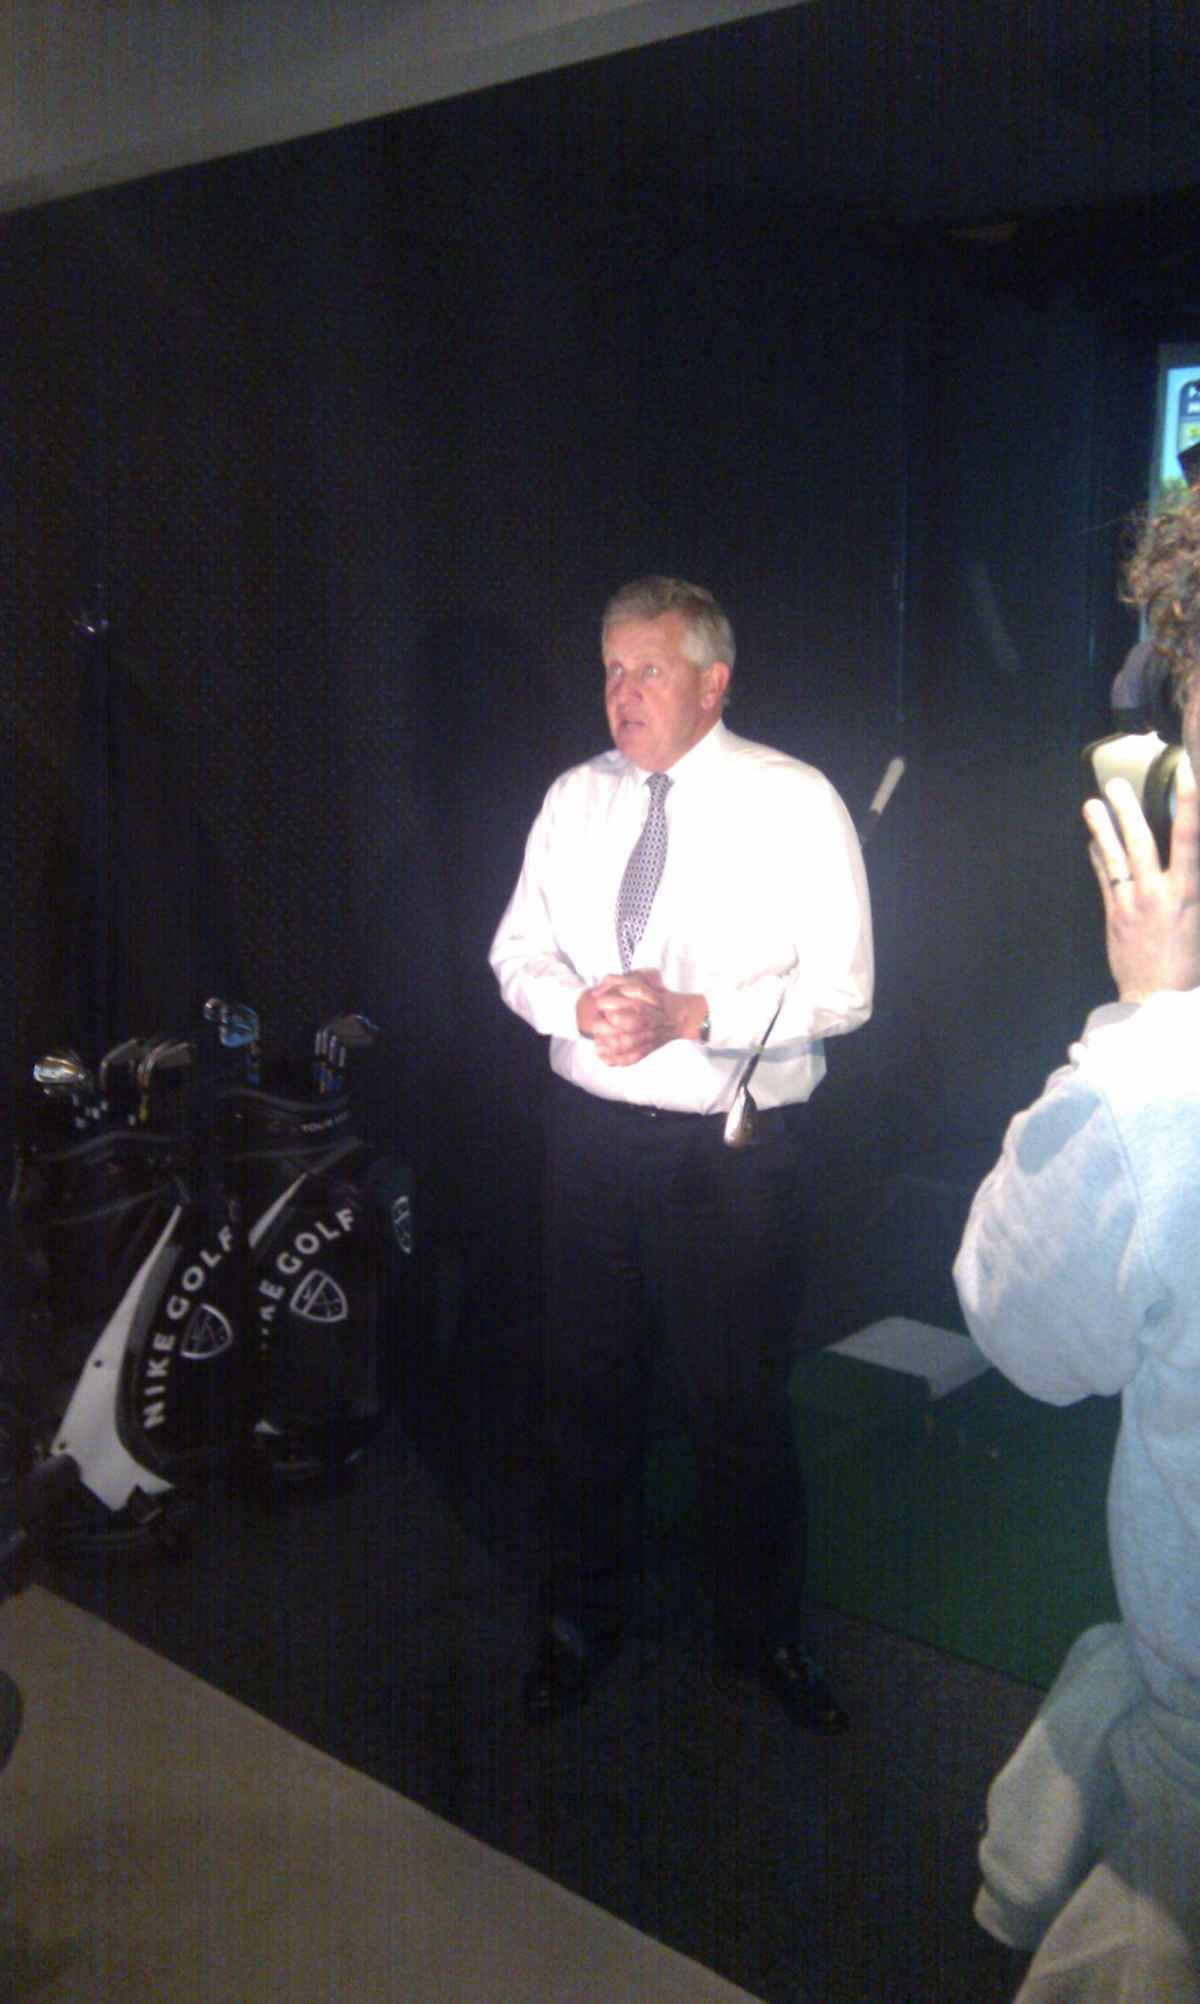 The new side of Colin Montgomerie